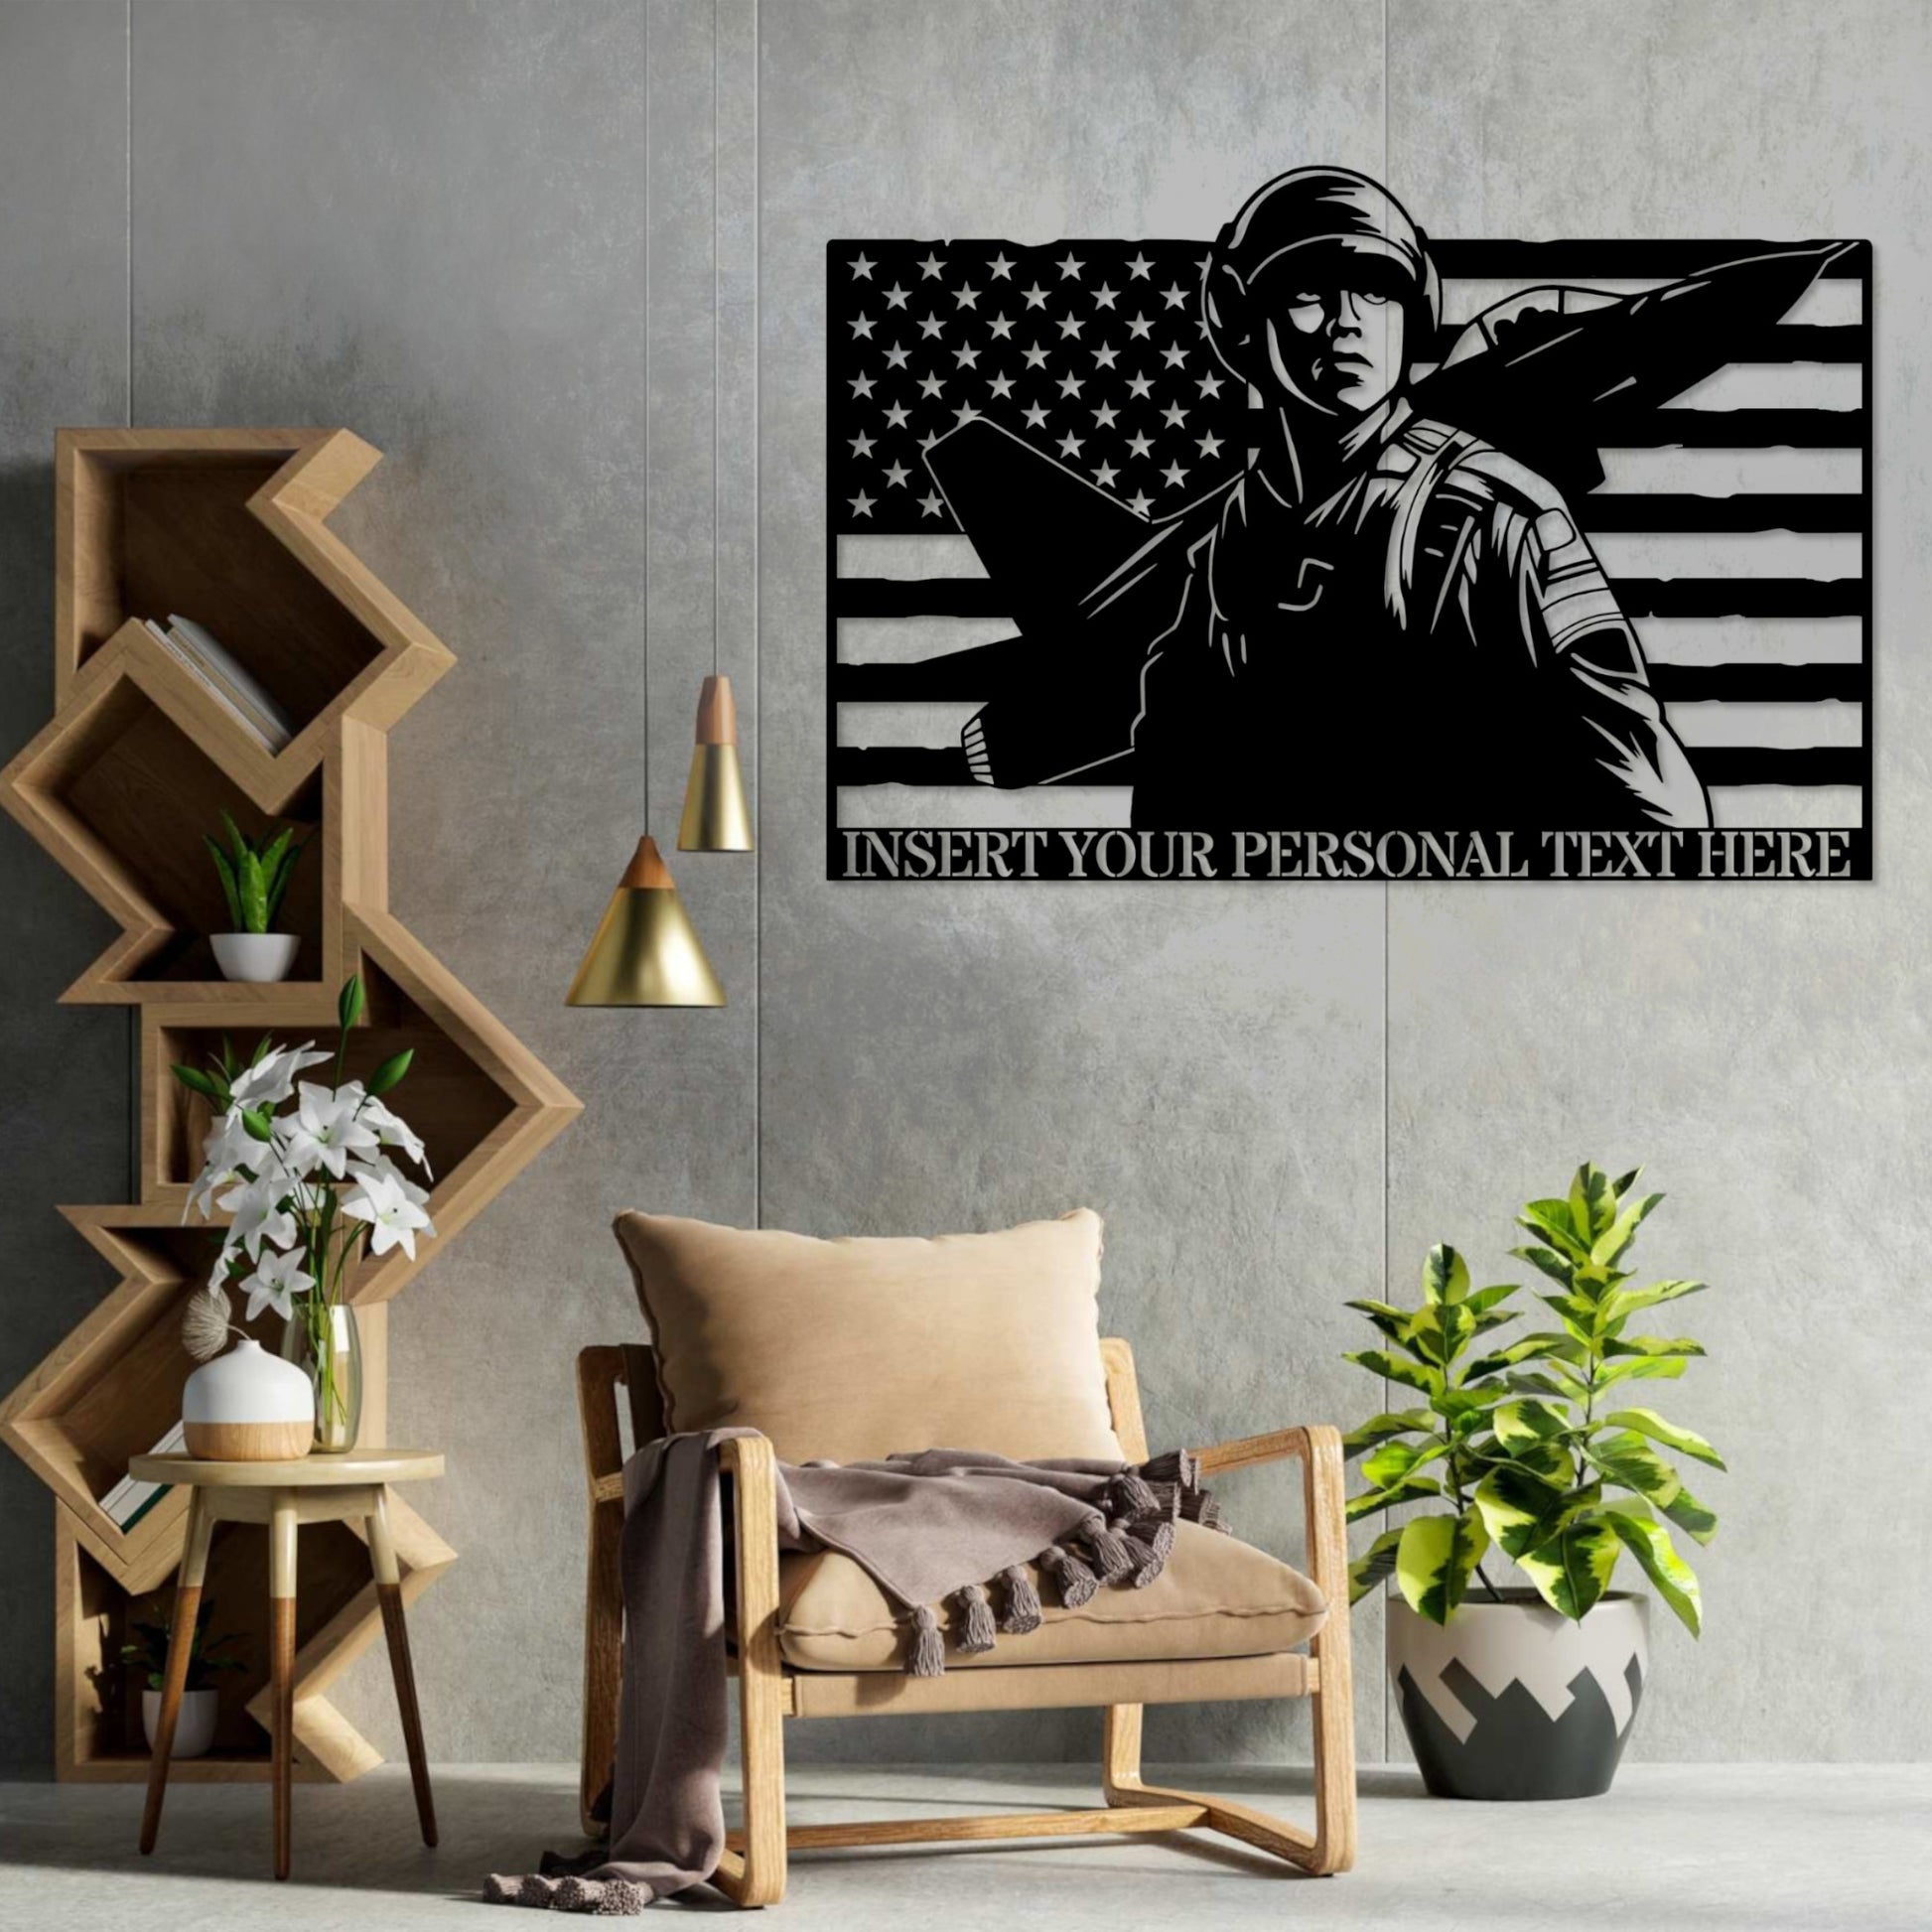 Personalized American Jet Fighter Pilot Metal Sign. Custom Air Force Wall Decor Gift. Military Retirement. Army Wall Hanging. US Metal Flag